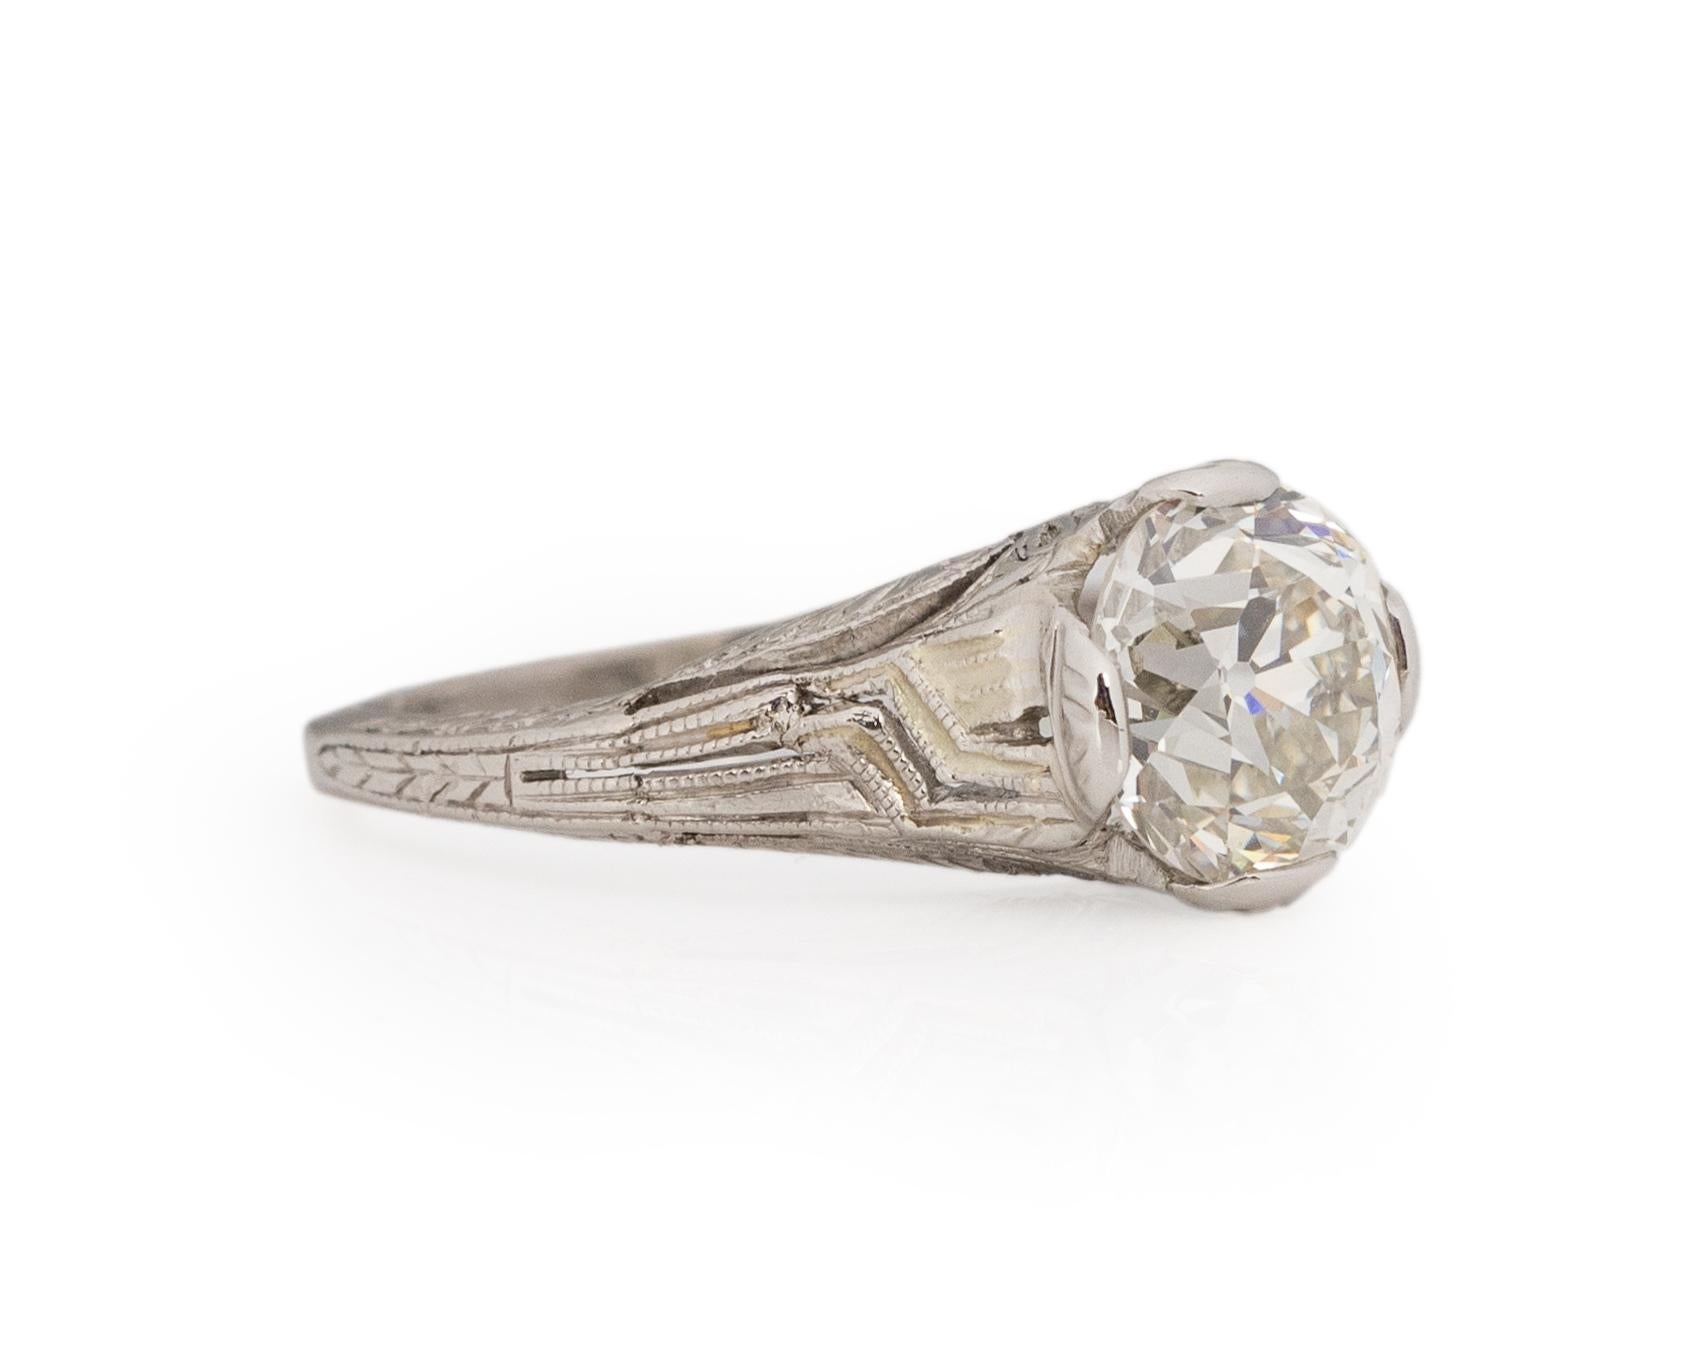 Ring Size: 5
Metal Type: Platinum [Hallmarked, and Tested]
Weight: 3.0 grams

Center Diamond Details:
GIA REPORT #: 6214948383
Weight: 1.62carat
Cut: Old European brilliant
Color: K
Clarity: SI1

Finger to Top of Stone Measurement: 6mm
Condition: